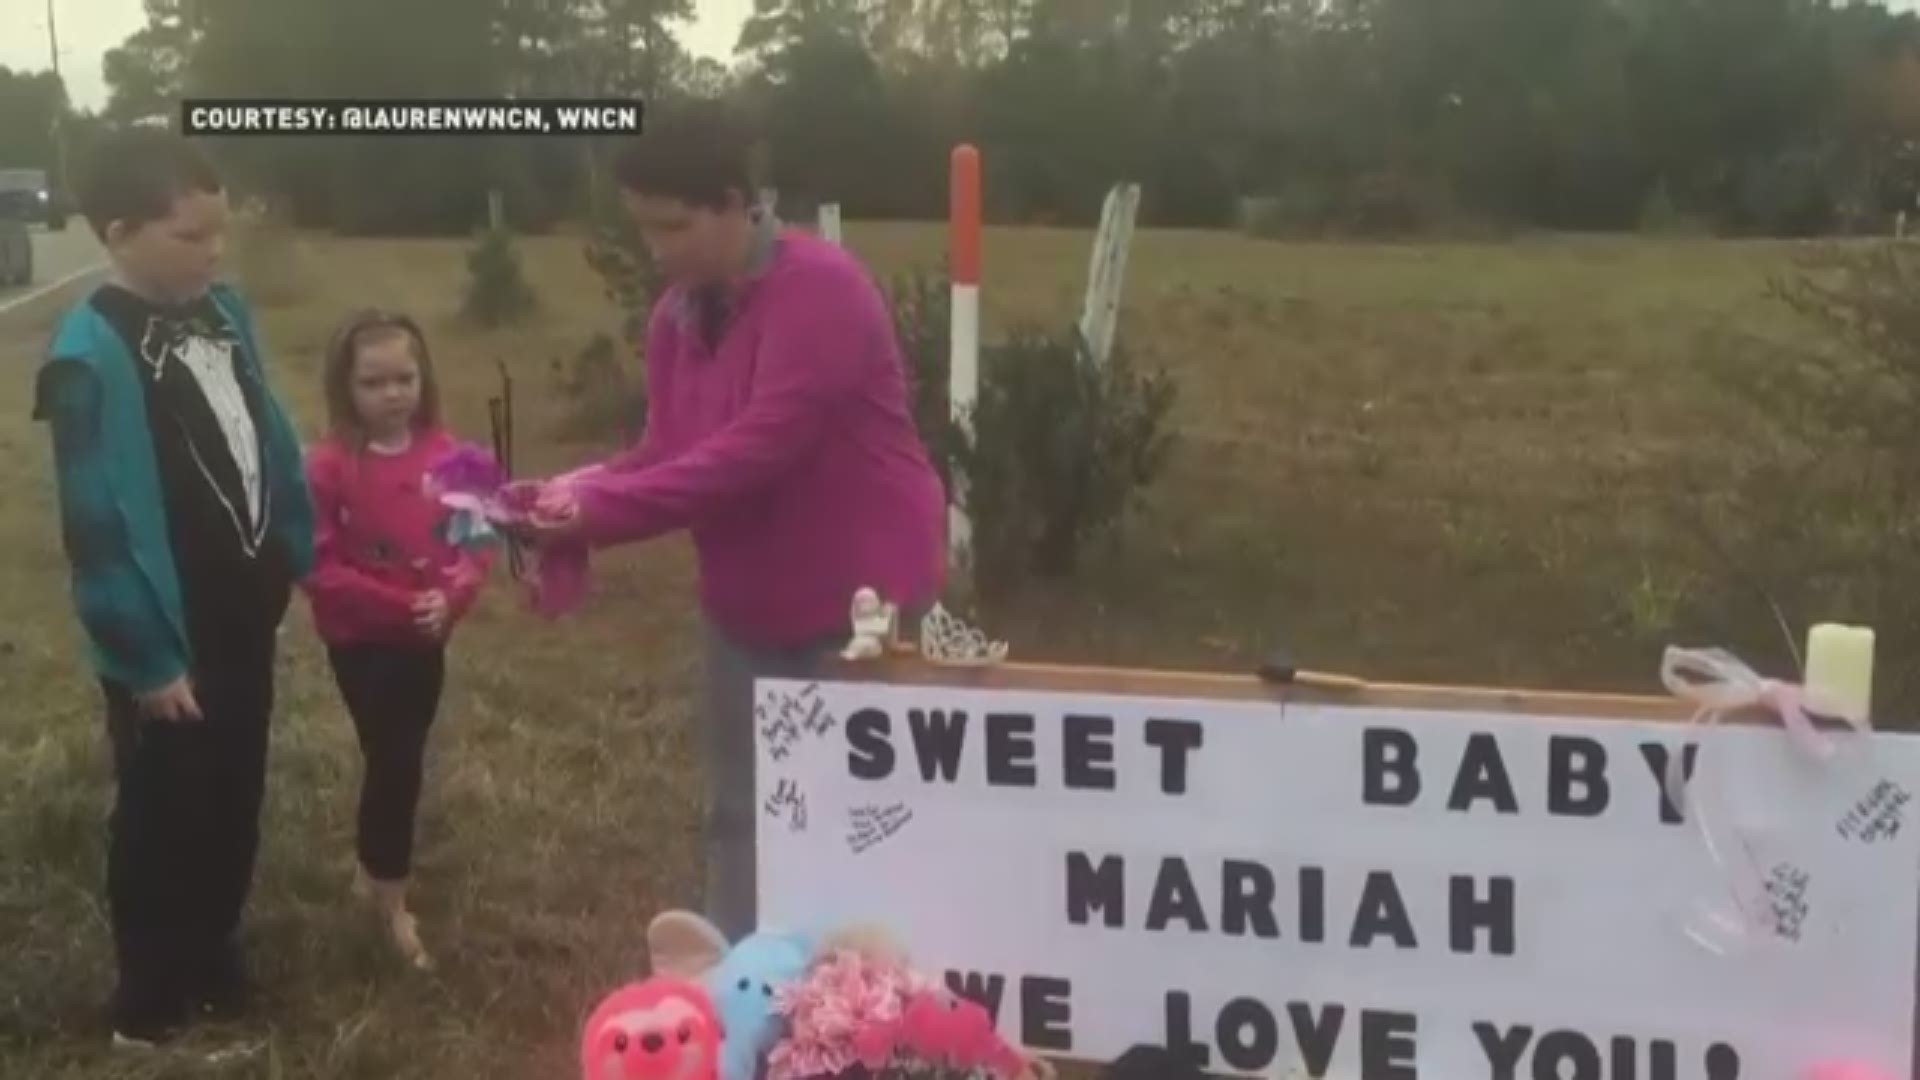 Search for Mariah Woods